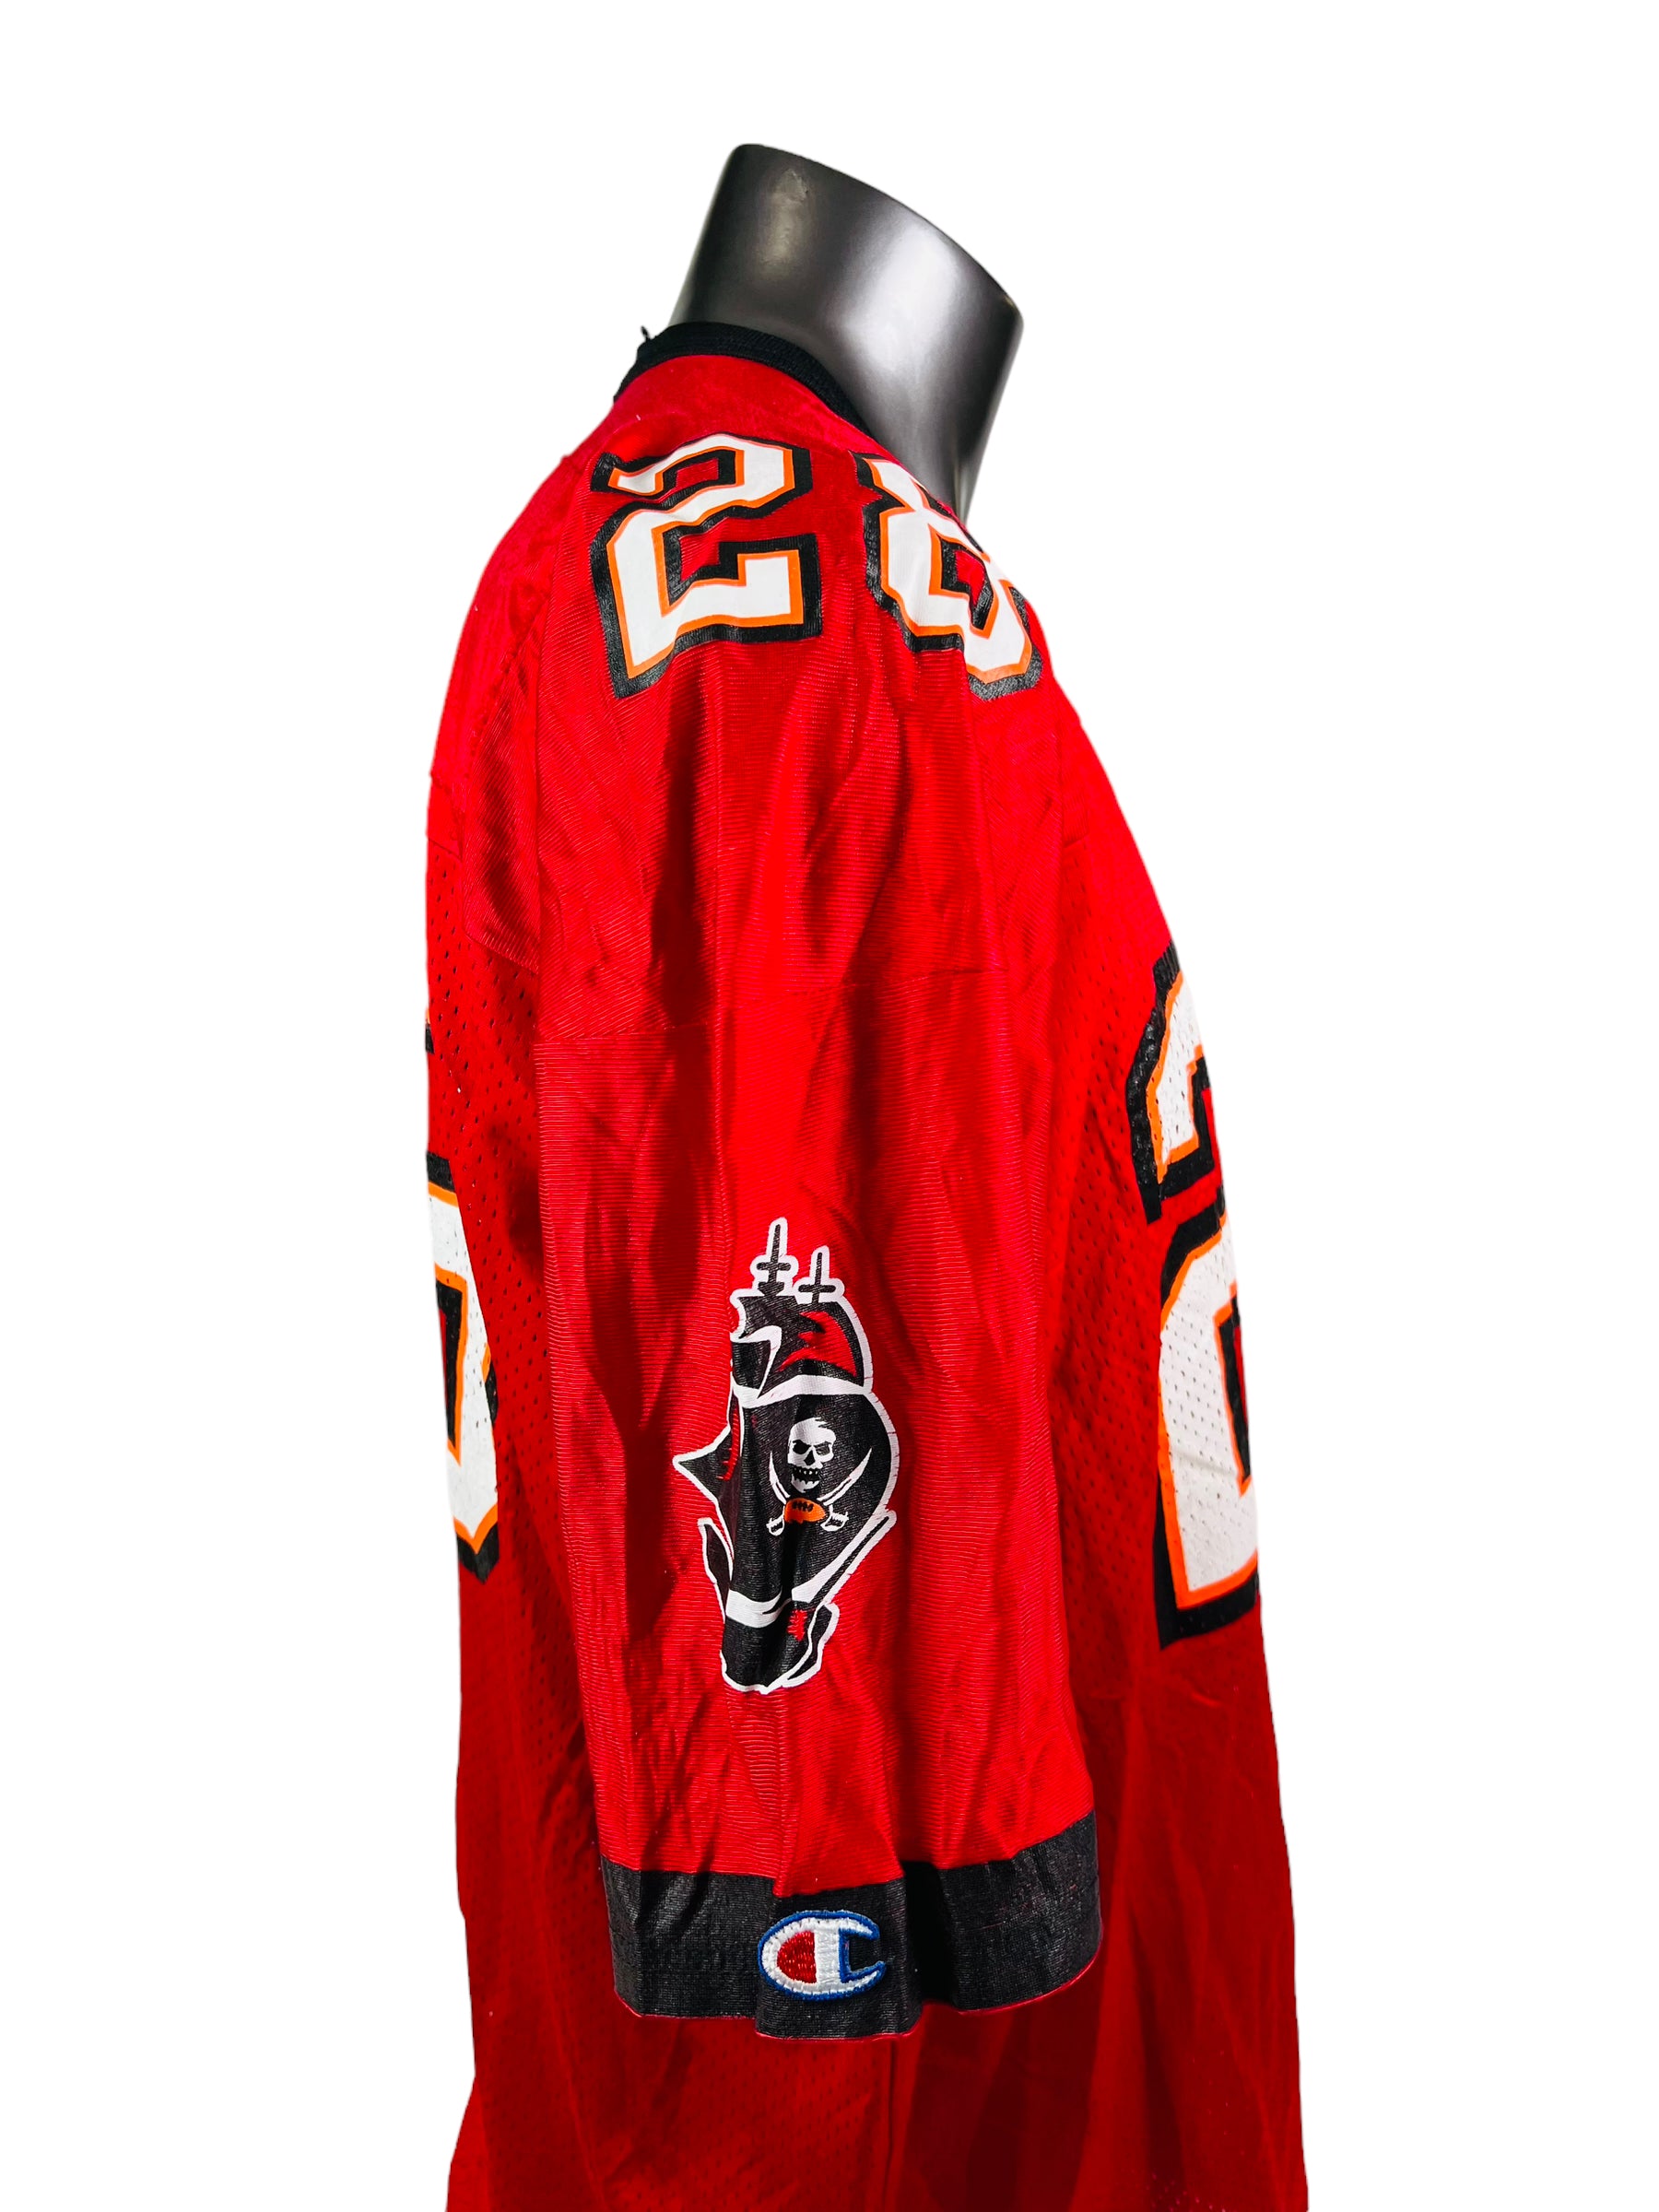 Tampa Bay Buccaneers - Jersey - #28 Dunn (size 52)